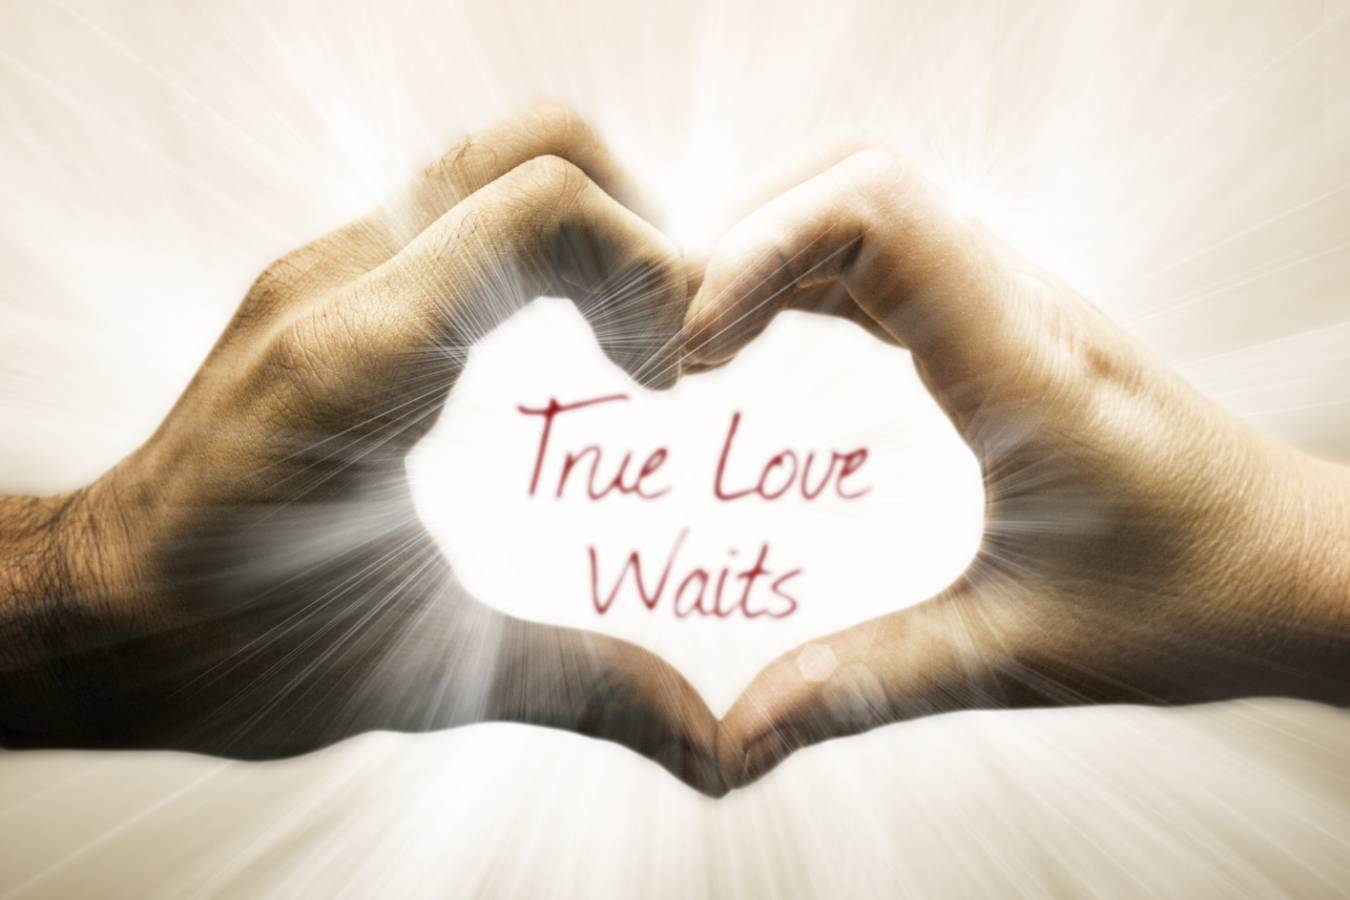 What I wish the True Love Waits movement would have taught me